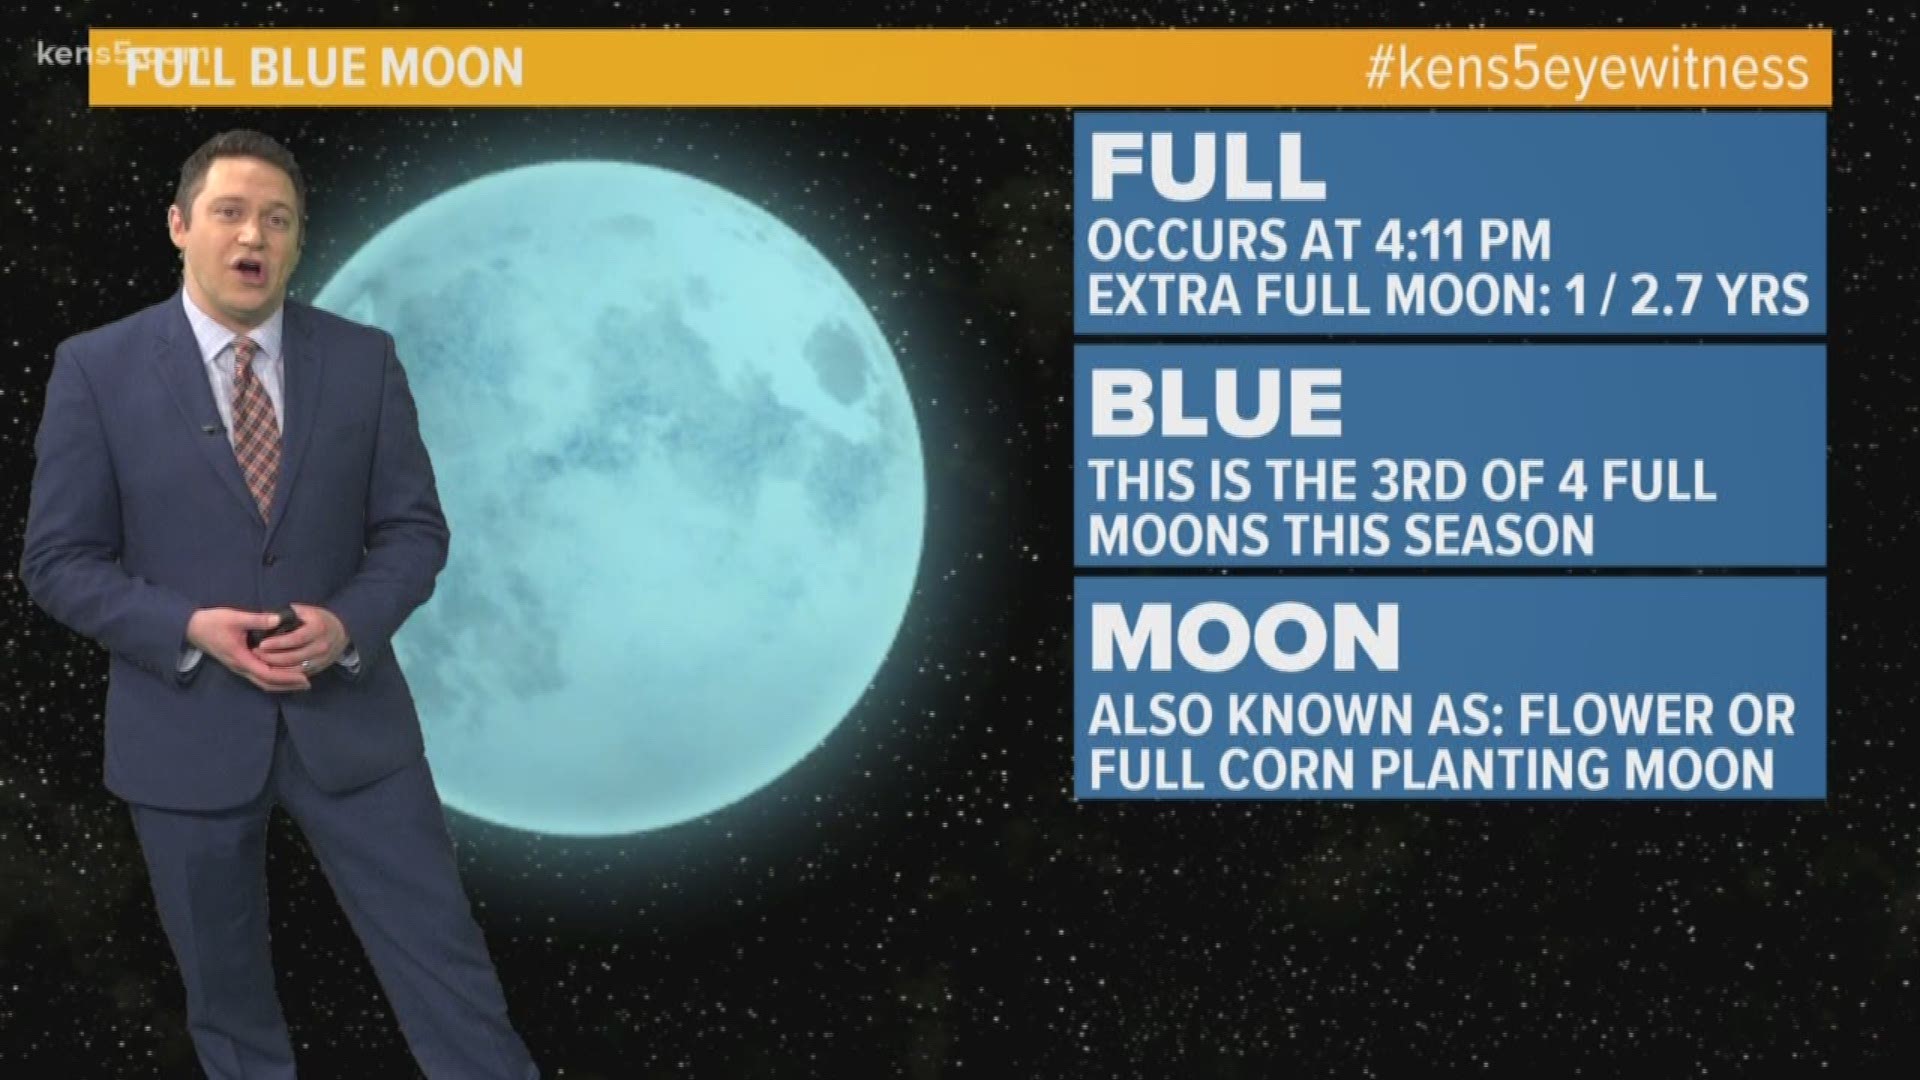 Once in a blue moon! You'll actually be able to see a full blue moon tonight. This is the 3rd of 4 full moons this season.